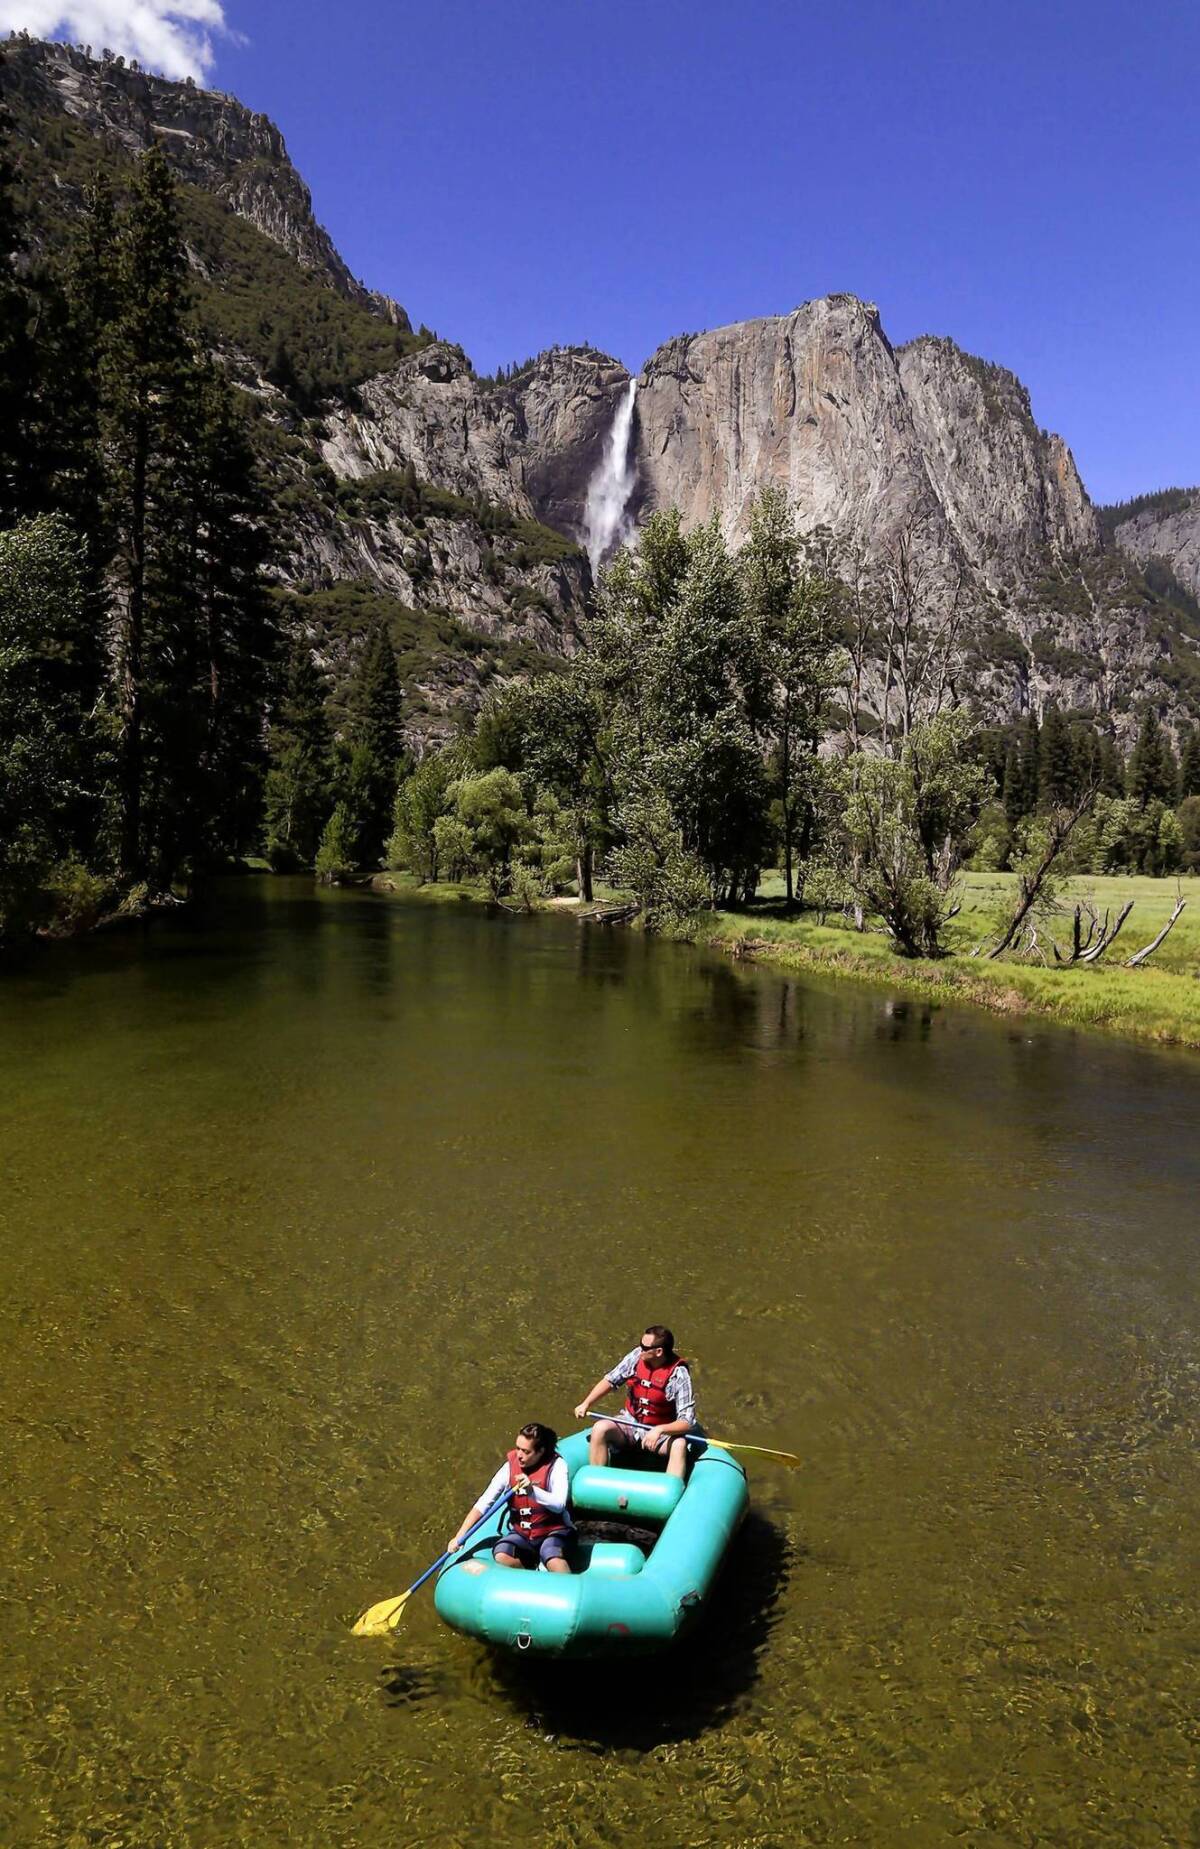 The National Park Service proposal aims to "protect and enhance" the Merced River, which runs for 81 miles inside Yosemite National Park.